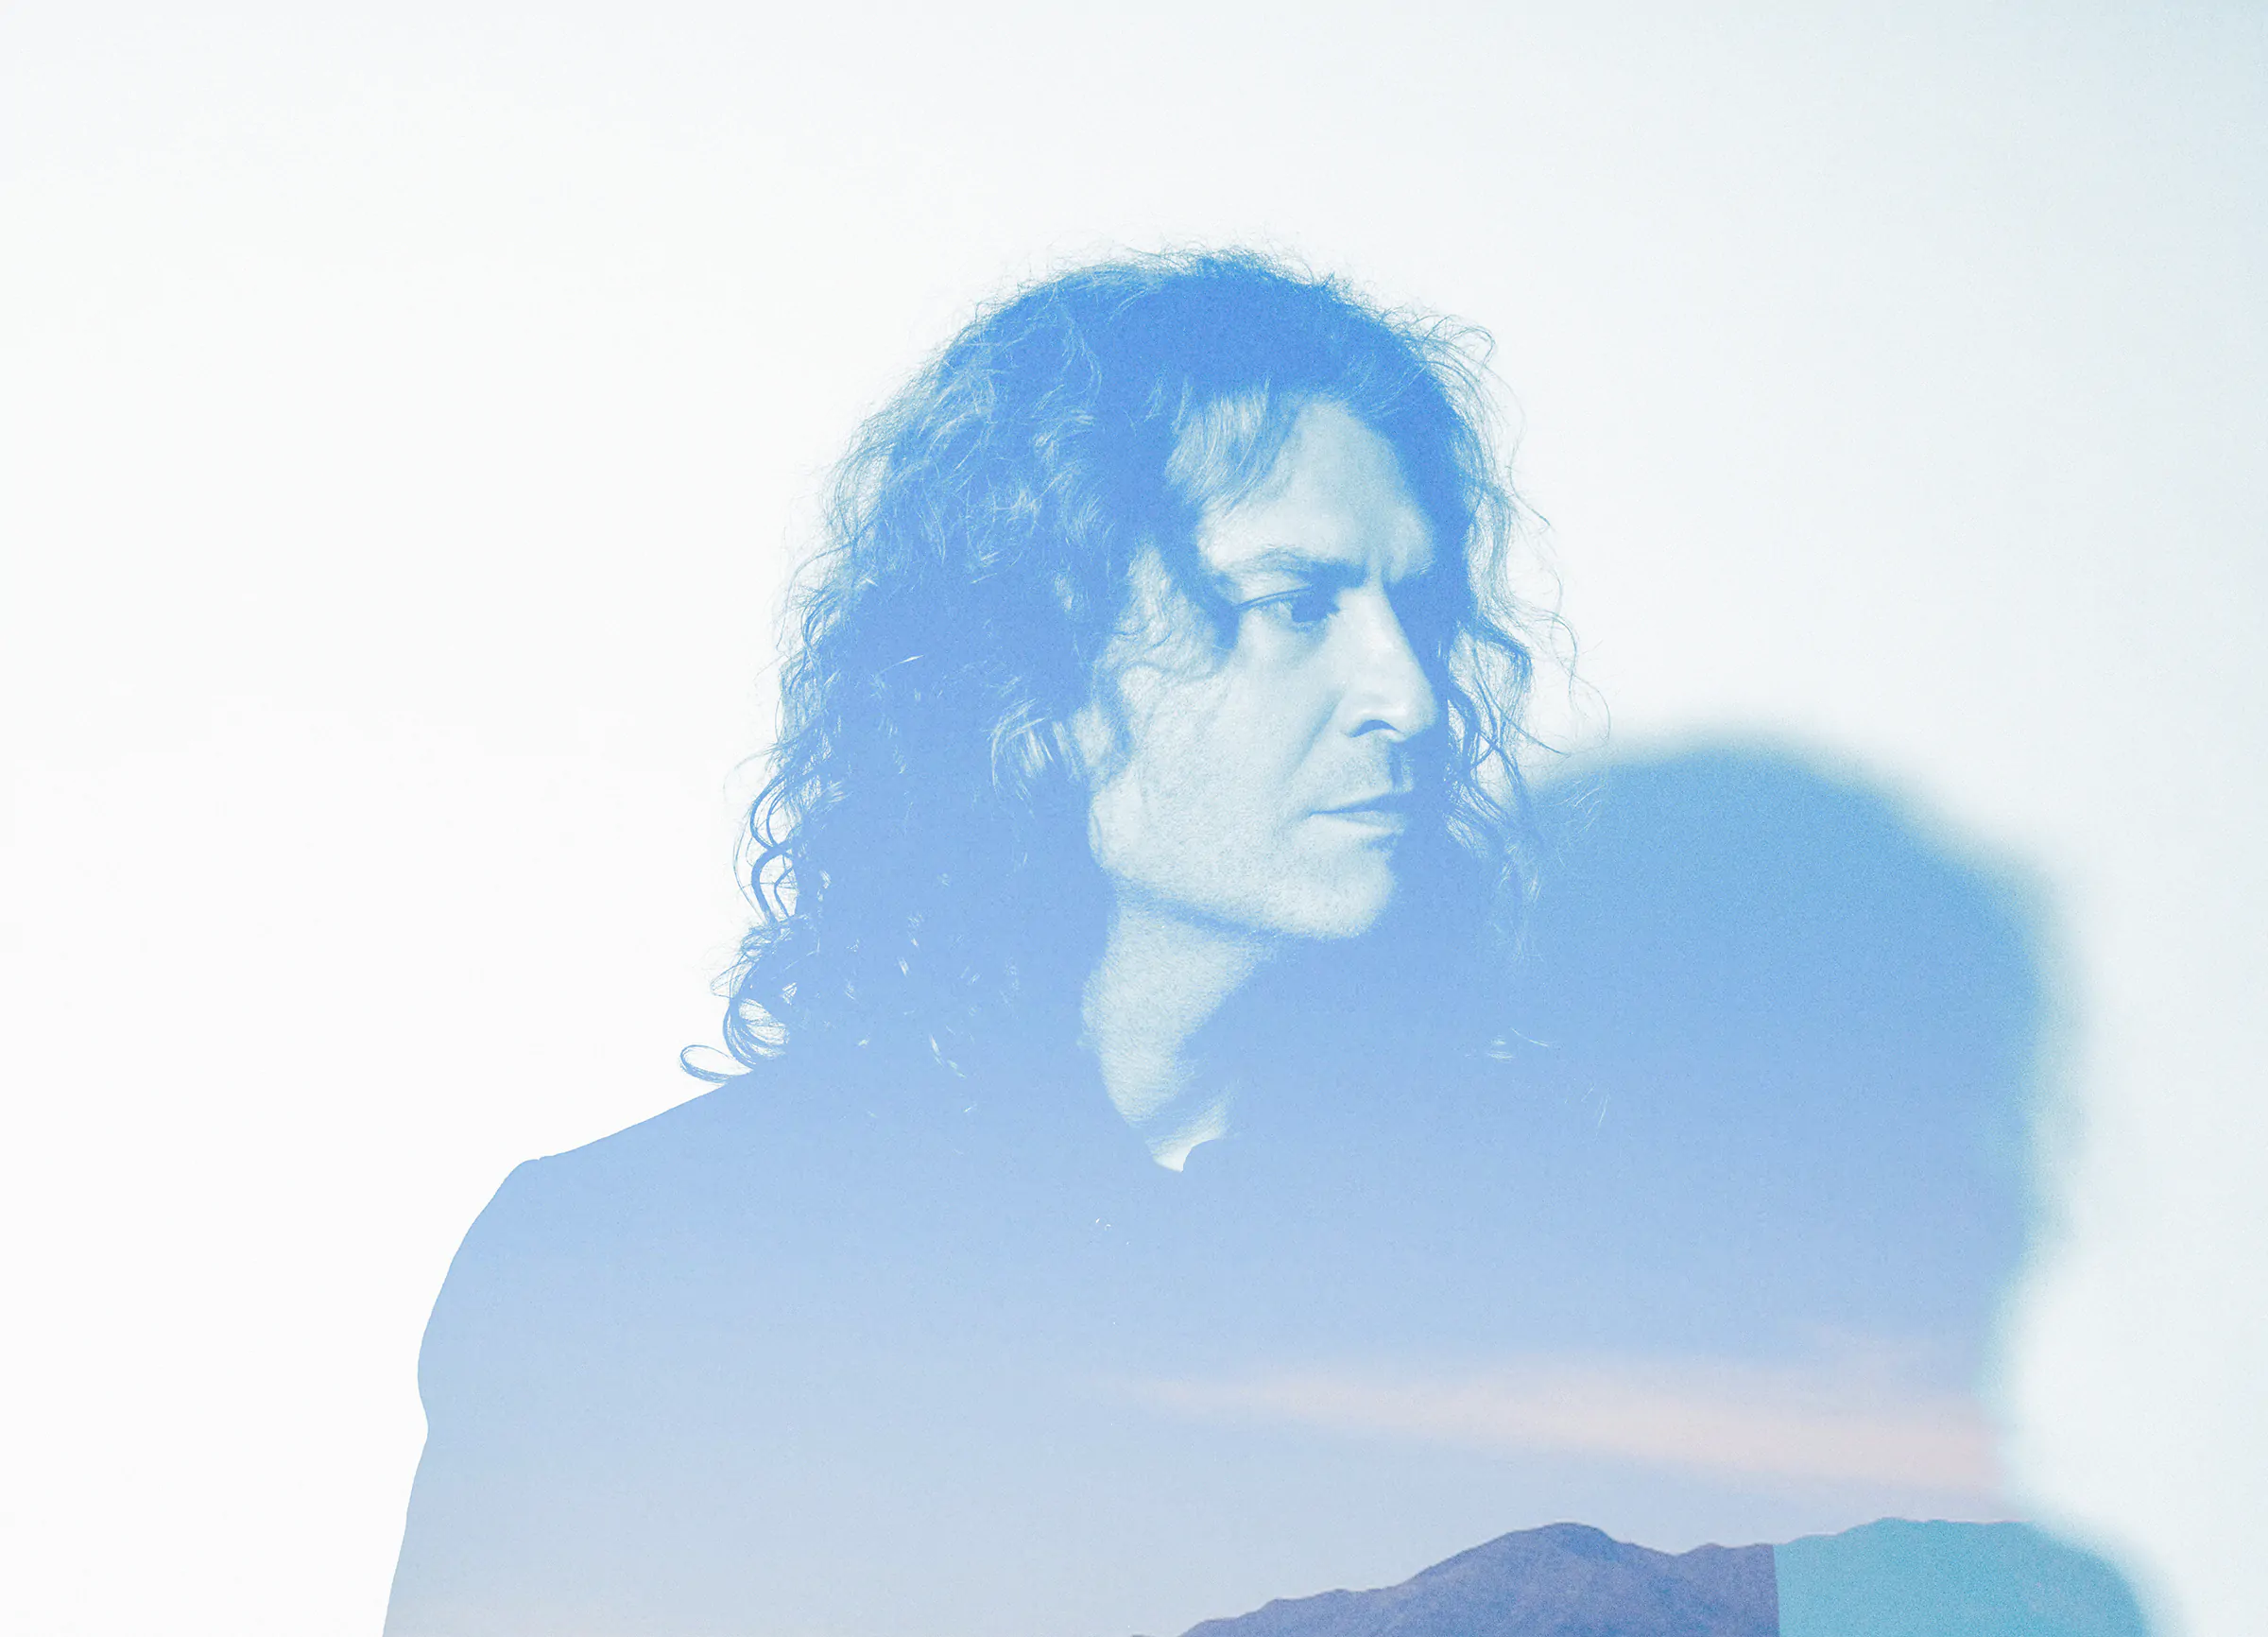 DAVE KEUNING shares the video for ‘From Stardust’ from his new LP ‘A Mild Case of Everything’